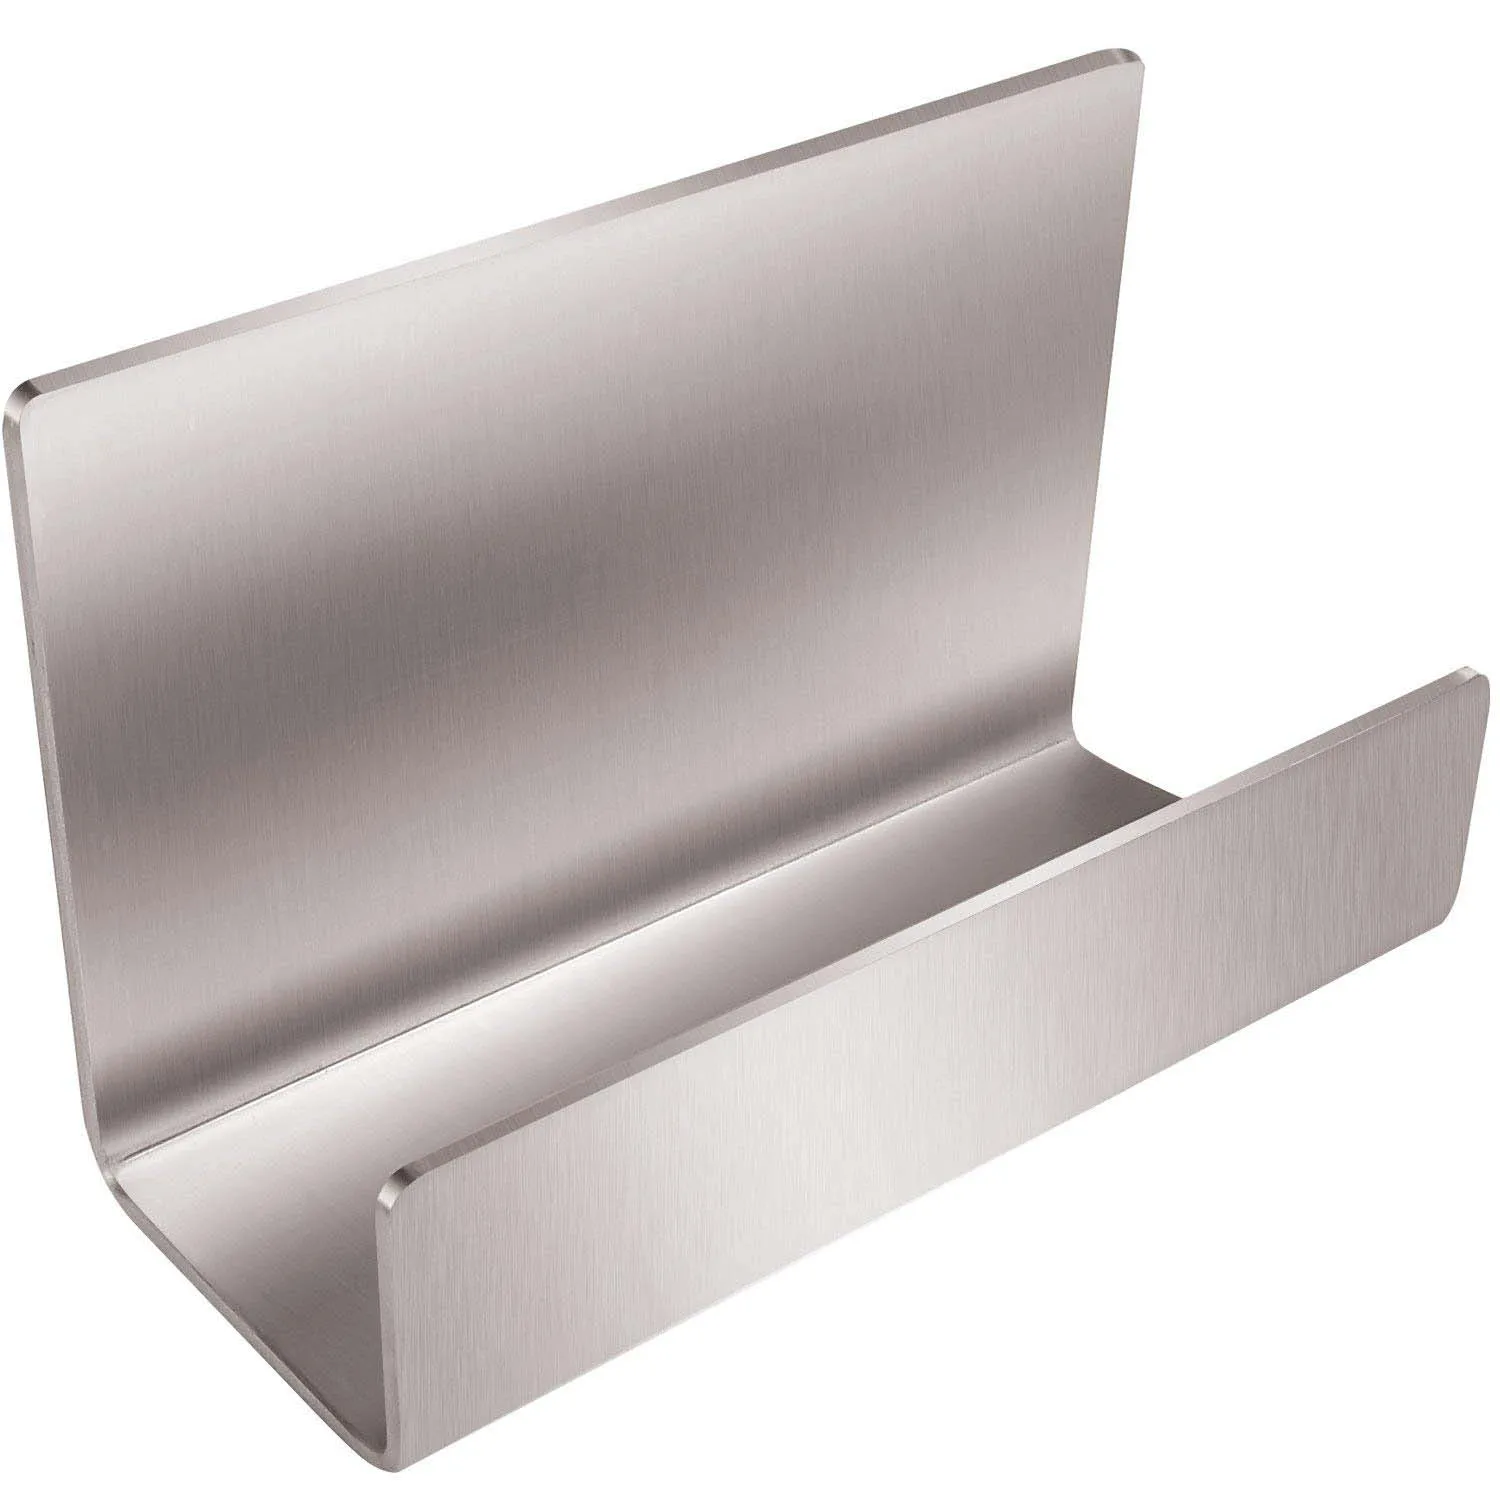 Фото Full Stainless Steel Office Business Card Holder Name Stand Display (Silver) | Канцтовары для офиса и дома